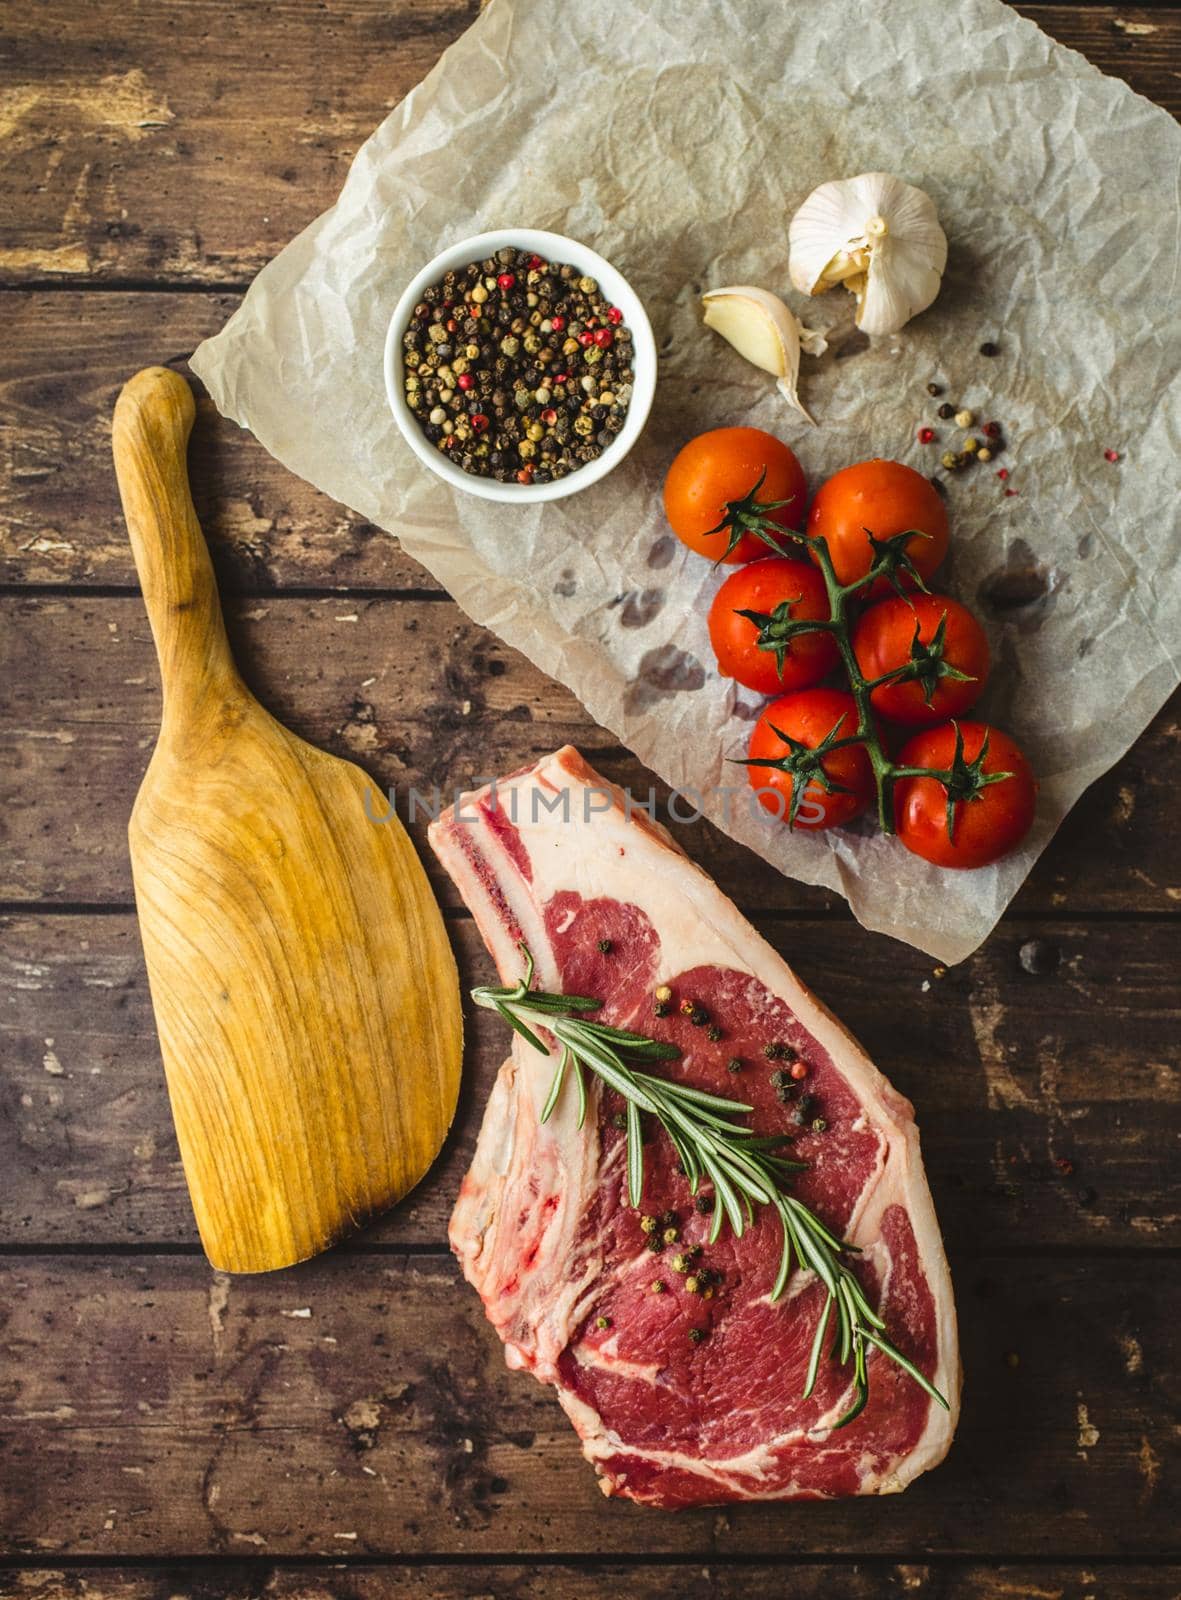 Raw marbled meat steak, pepper, herbs, tomatoes, old wooden table background. Beef Rib eye steak ready for cooking. Top view. Ingredients ready for meat roasting. Uncooked Ribeye meat steak. Closeup